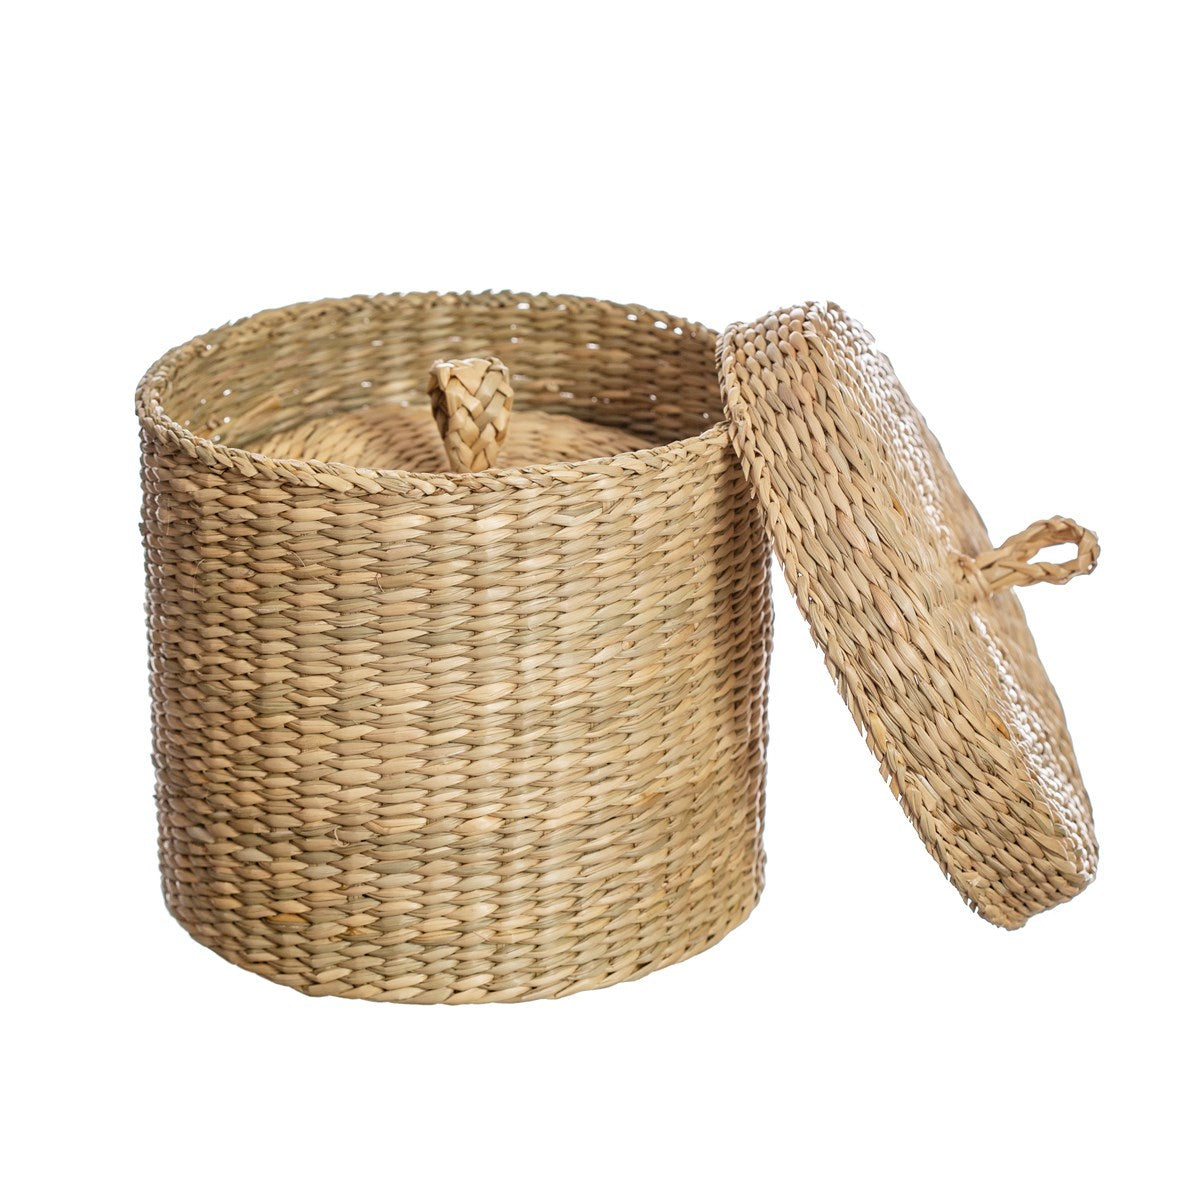 Seagrass Baskets // 2 PACK